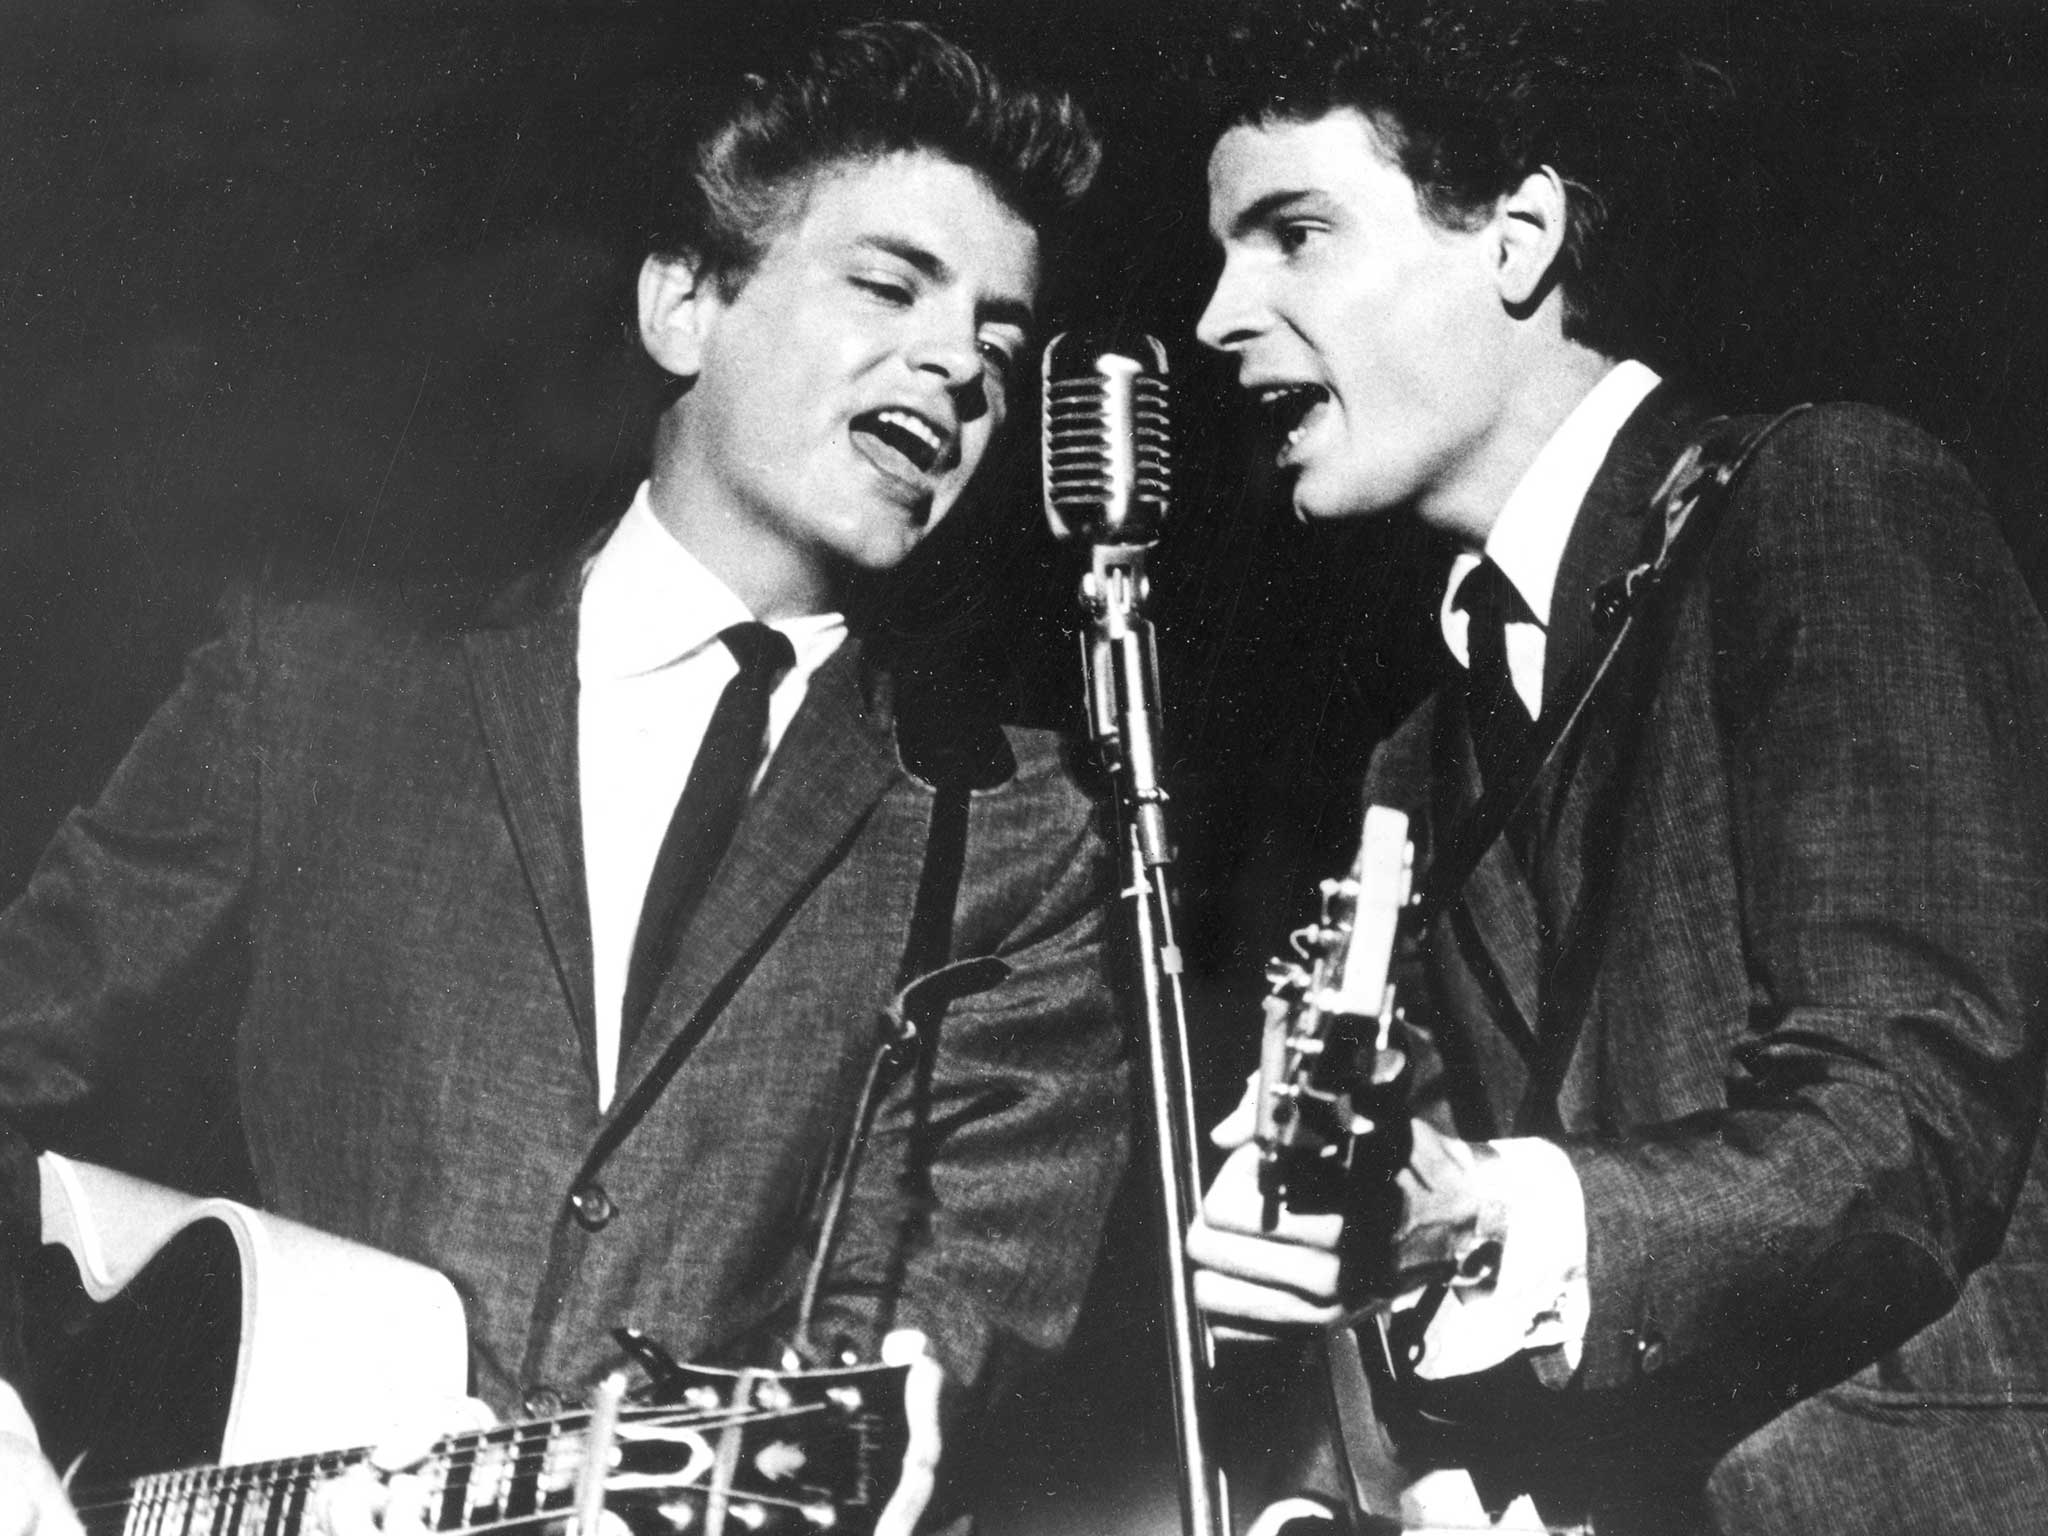 The Everly Brothers, Phil, left, and Don, perform on stage in 1964